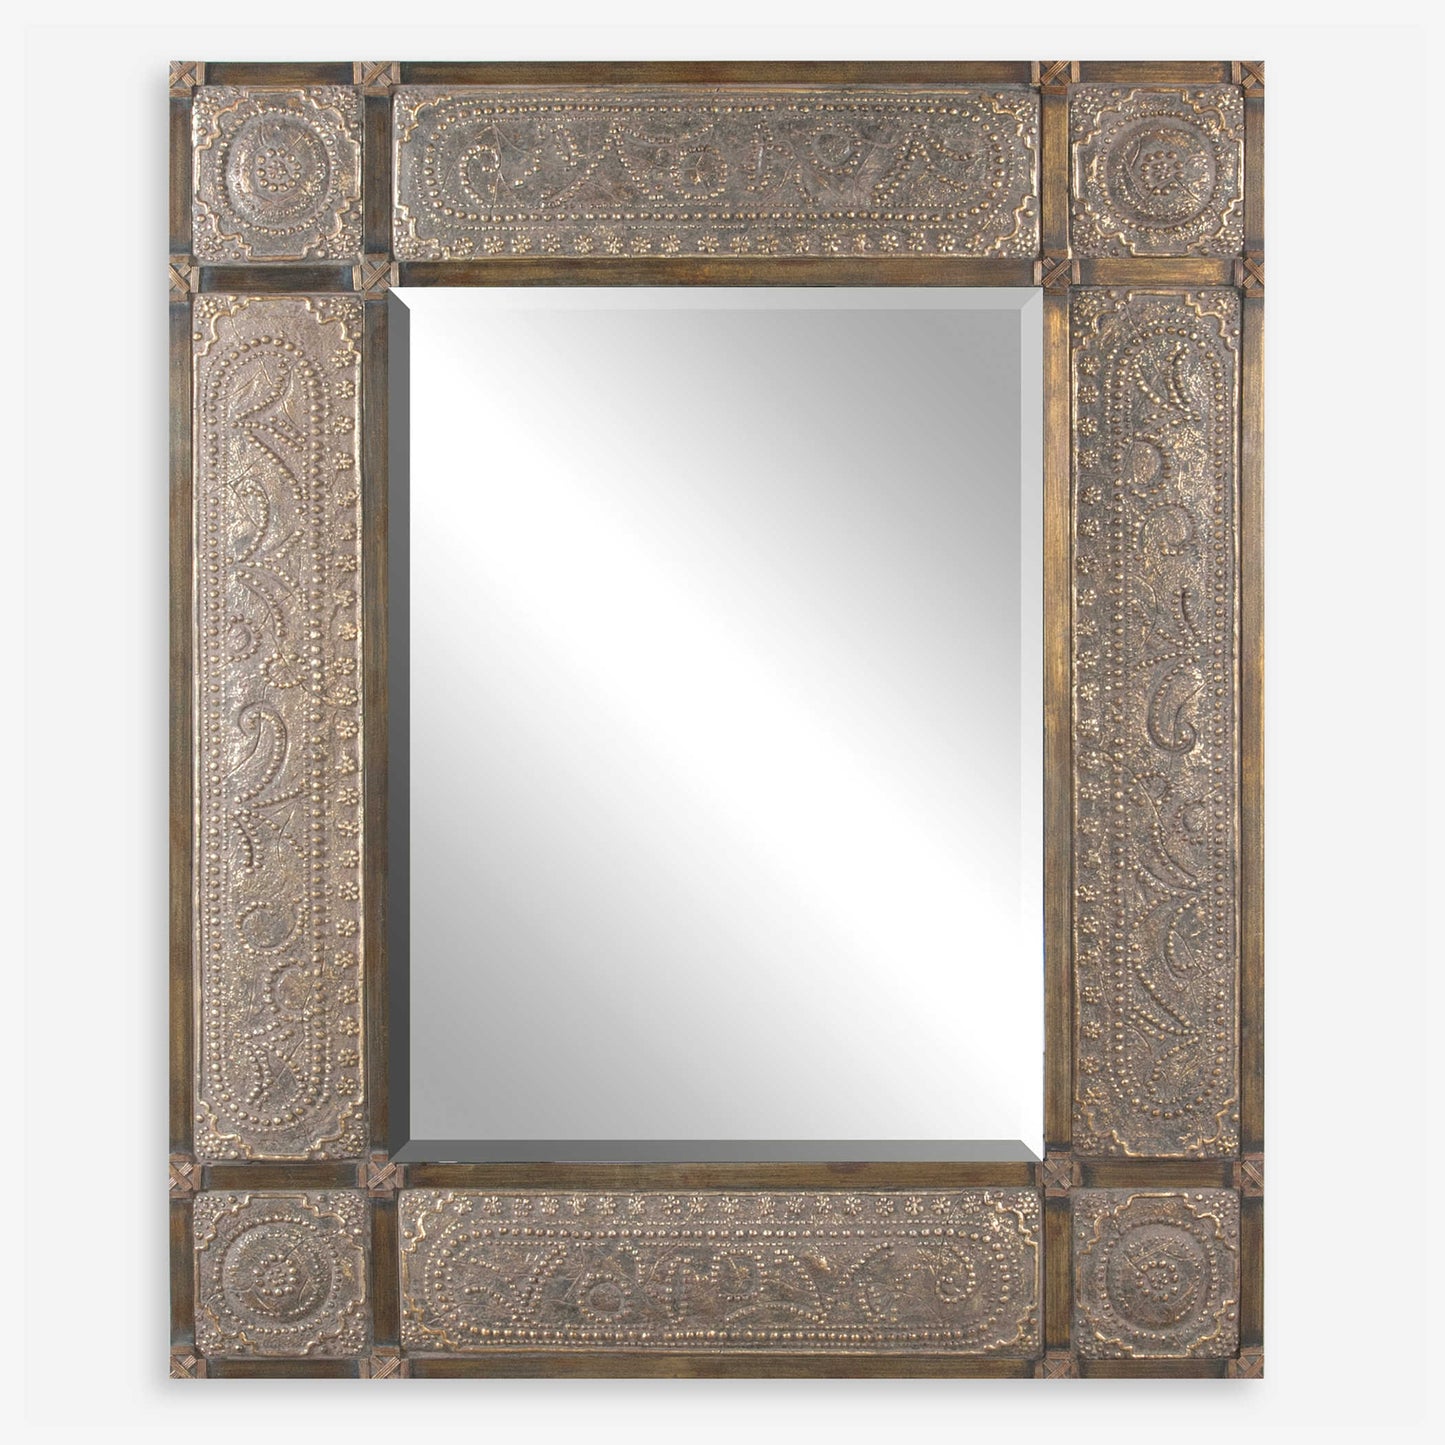  This ornate frame features heavily distressed, golden champagne leaf with black undertones, deep red dry brushing and a heavy, rusty tan wash. Mirror has a generous 1 1/4" bevel and may be hung horizontal or vertical.